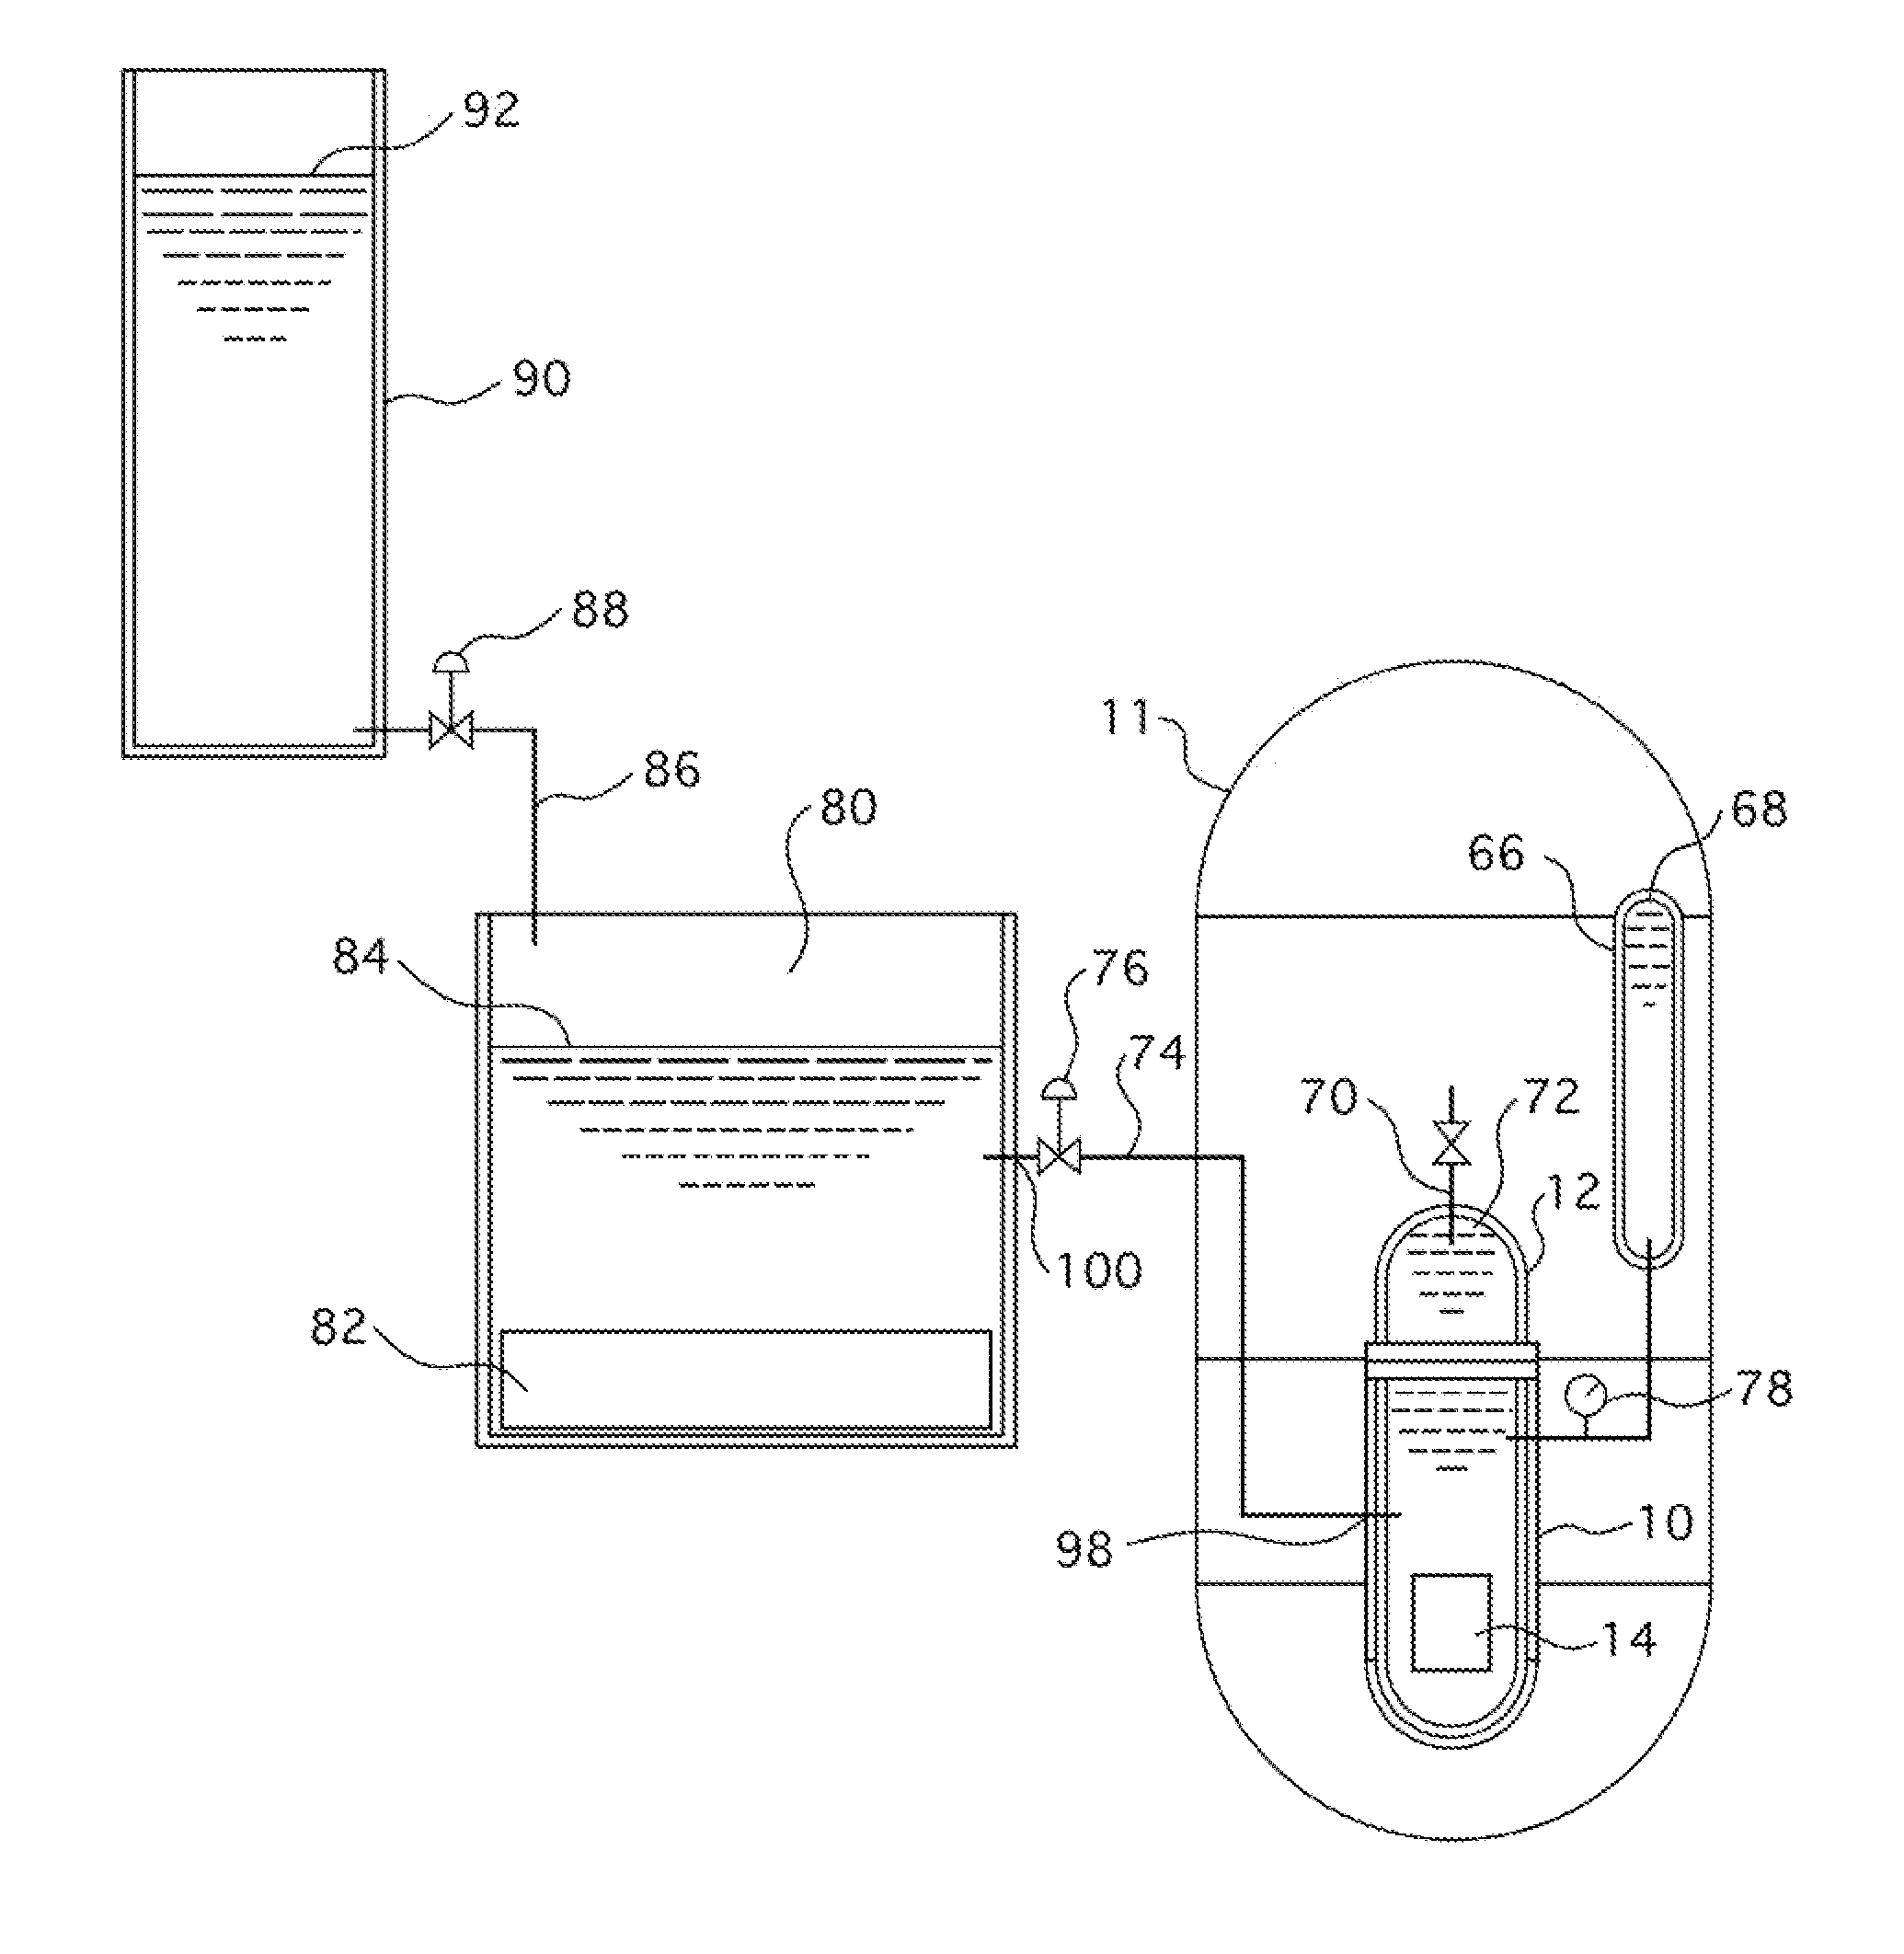 Passive system for cooling the core of a nuclear reactor